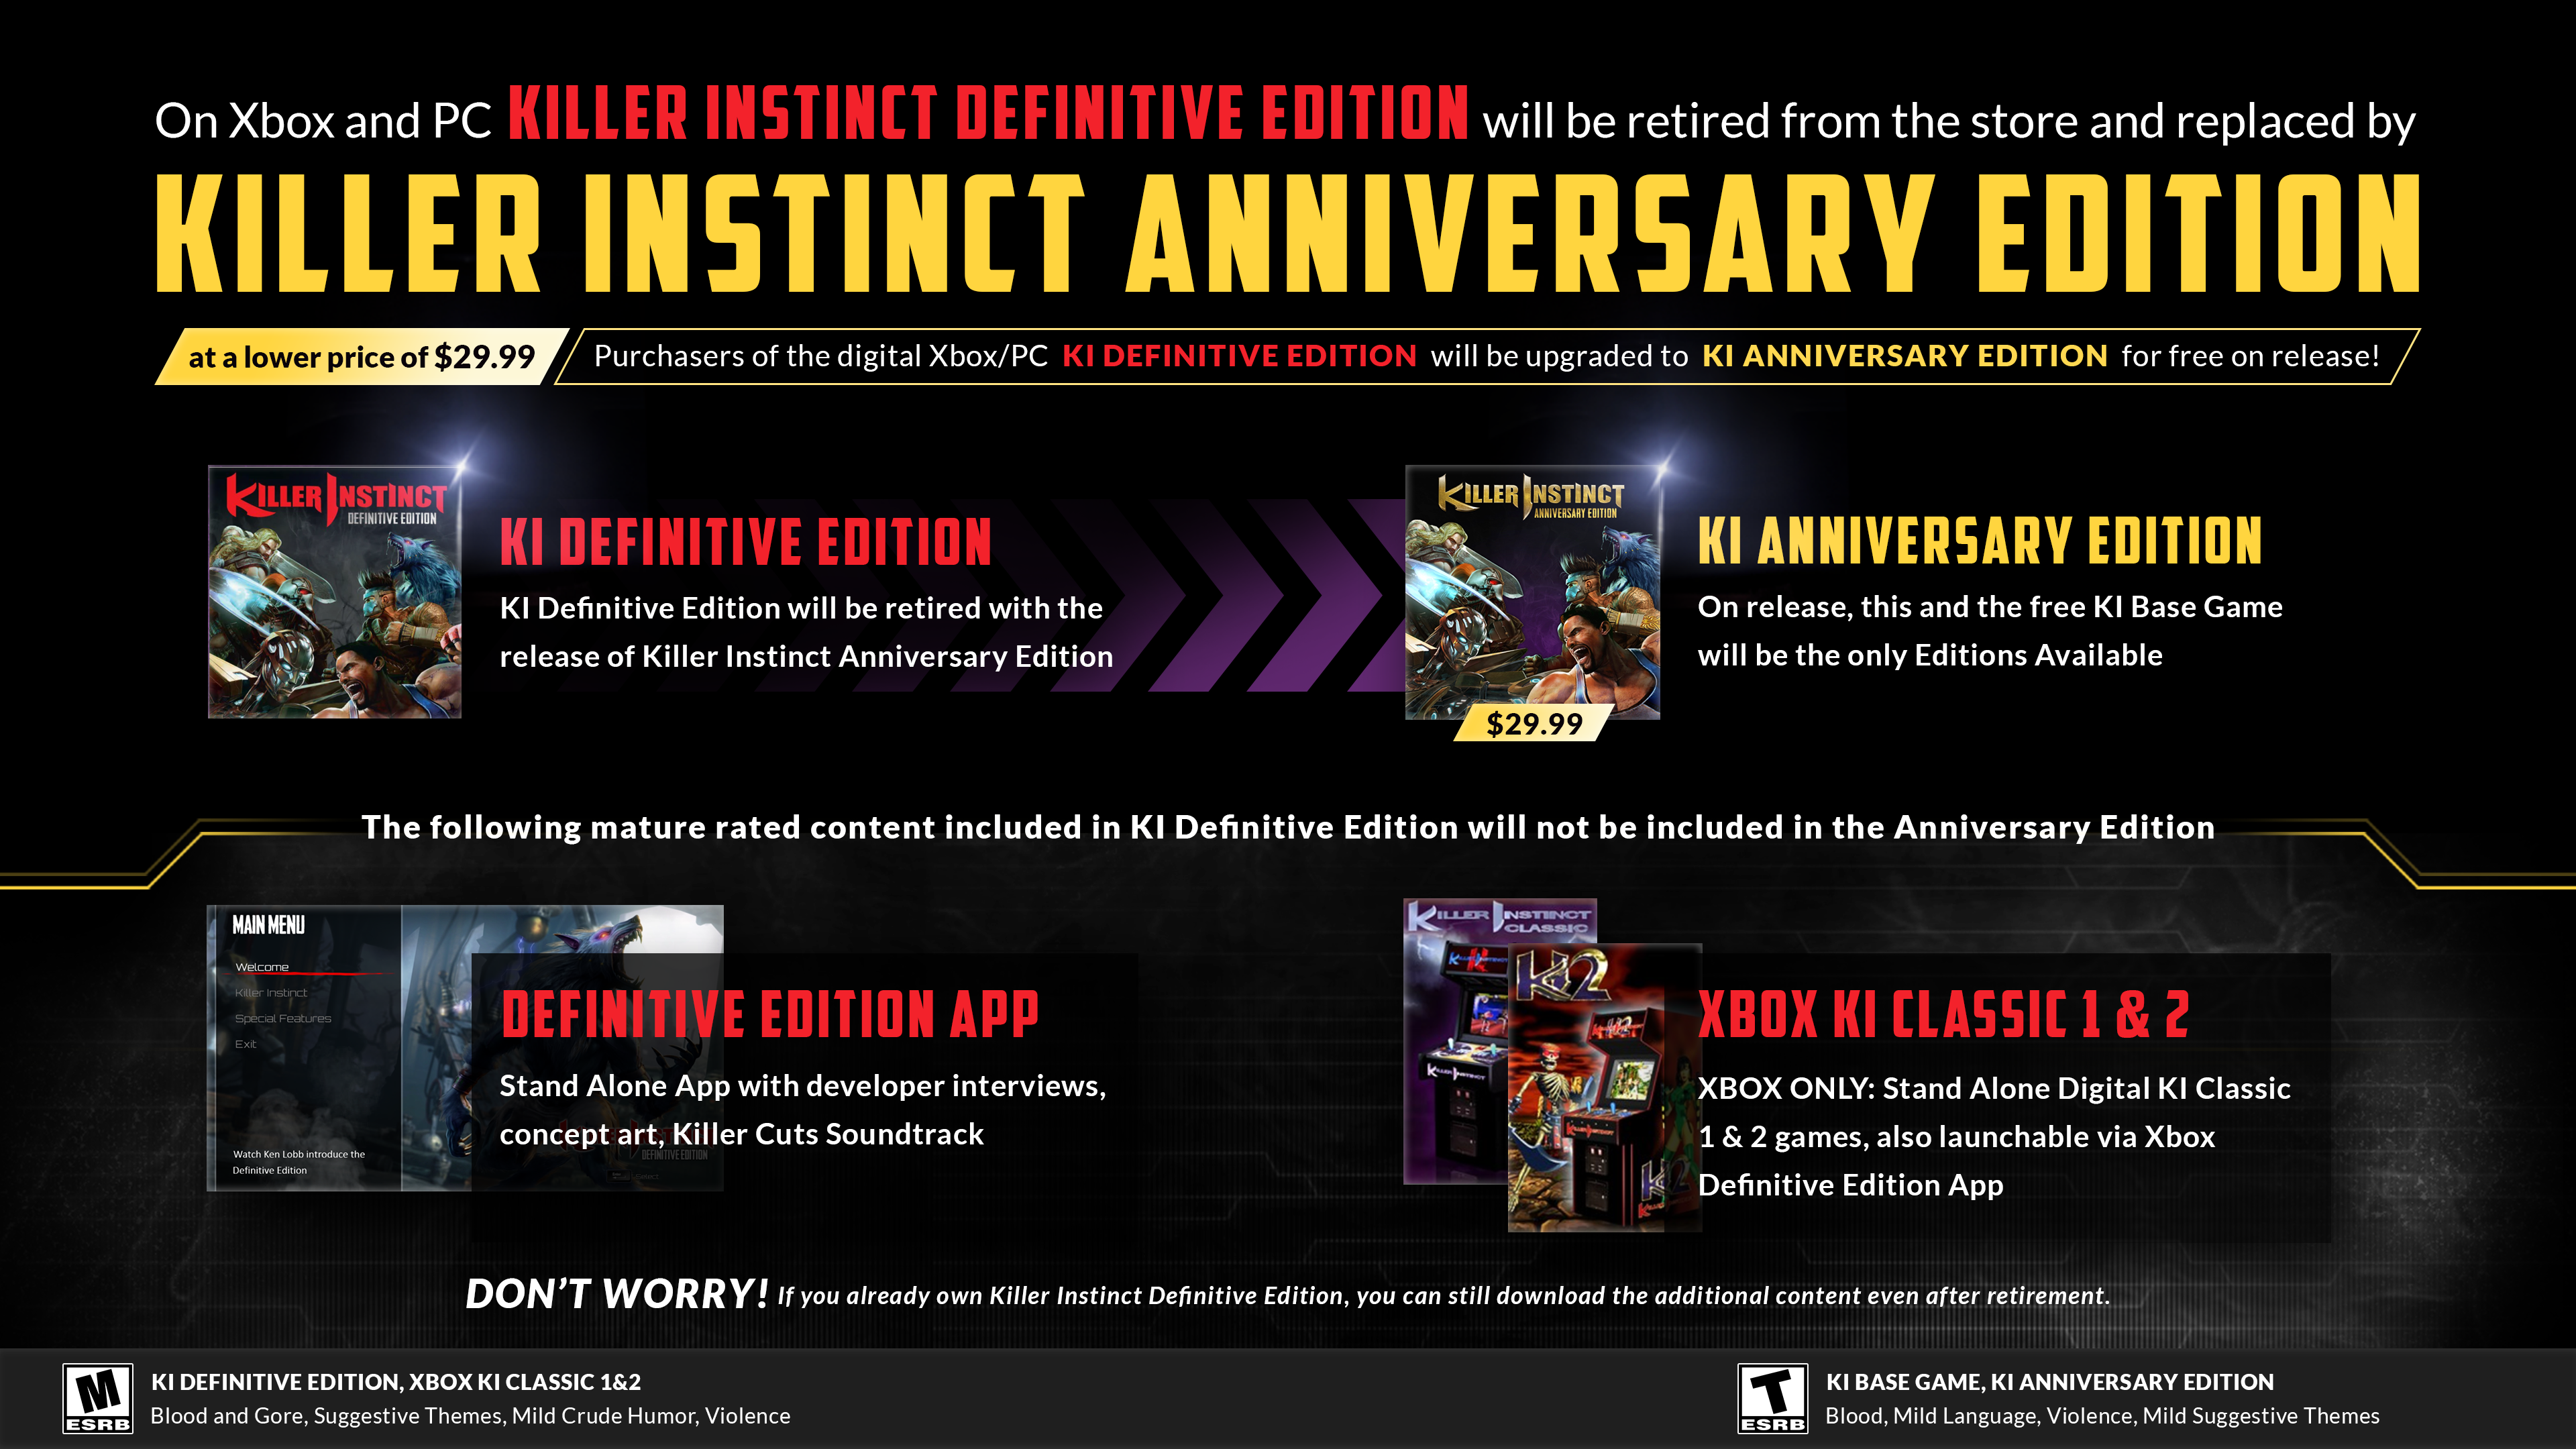 On Xbox and PC Killer Instinct Definitive Edition will be retired from the store and replaced by Killer Instinct Anniversary Edition at a lower price of $29.99 Purchasers of the digital Xbox/PC KI Definitive Edition will be upgraded to KI Anniversary Edition for free on release! KI Definitive Edition will be retired with the release of Killer Instinct Anniversary Edition KI Anniversary Edition ($29.99) On release, this and the free KI Base Game will be the only Editions available The following Mature-rated content included in KI Definitive Edition will not be included in the Anniversary Edition: Definitive Edition App: Stand Alone App with developer interviews, concept art, Killer Cuts Soundtrack Xbox KI Classic 1 & 2 XBOX ONLY: Stand Alone Digital KI Classic 1 & 2 games, also launchable via Xbox Definitive Edition App DON'T WORRY! If you already own Killer Instinct Definitive Edition, you can still download the additional content even after retirement. ESRB Rated M for Mature: KI Definitive Edition, Xbox KI Classic 1 & 2; Blood and Gore, Suggestive Themes, Mild Crude Humor, Violence ESRB Rated T for Teen: KI Base Game, KI Anniversary Edition; Blood, Mild Language, Violence, Mild Suggestive Themes